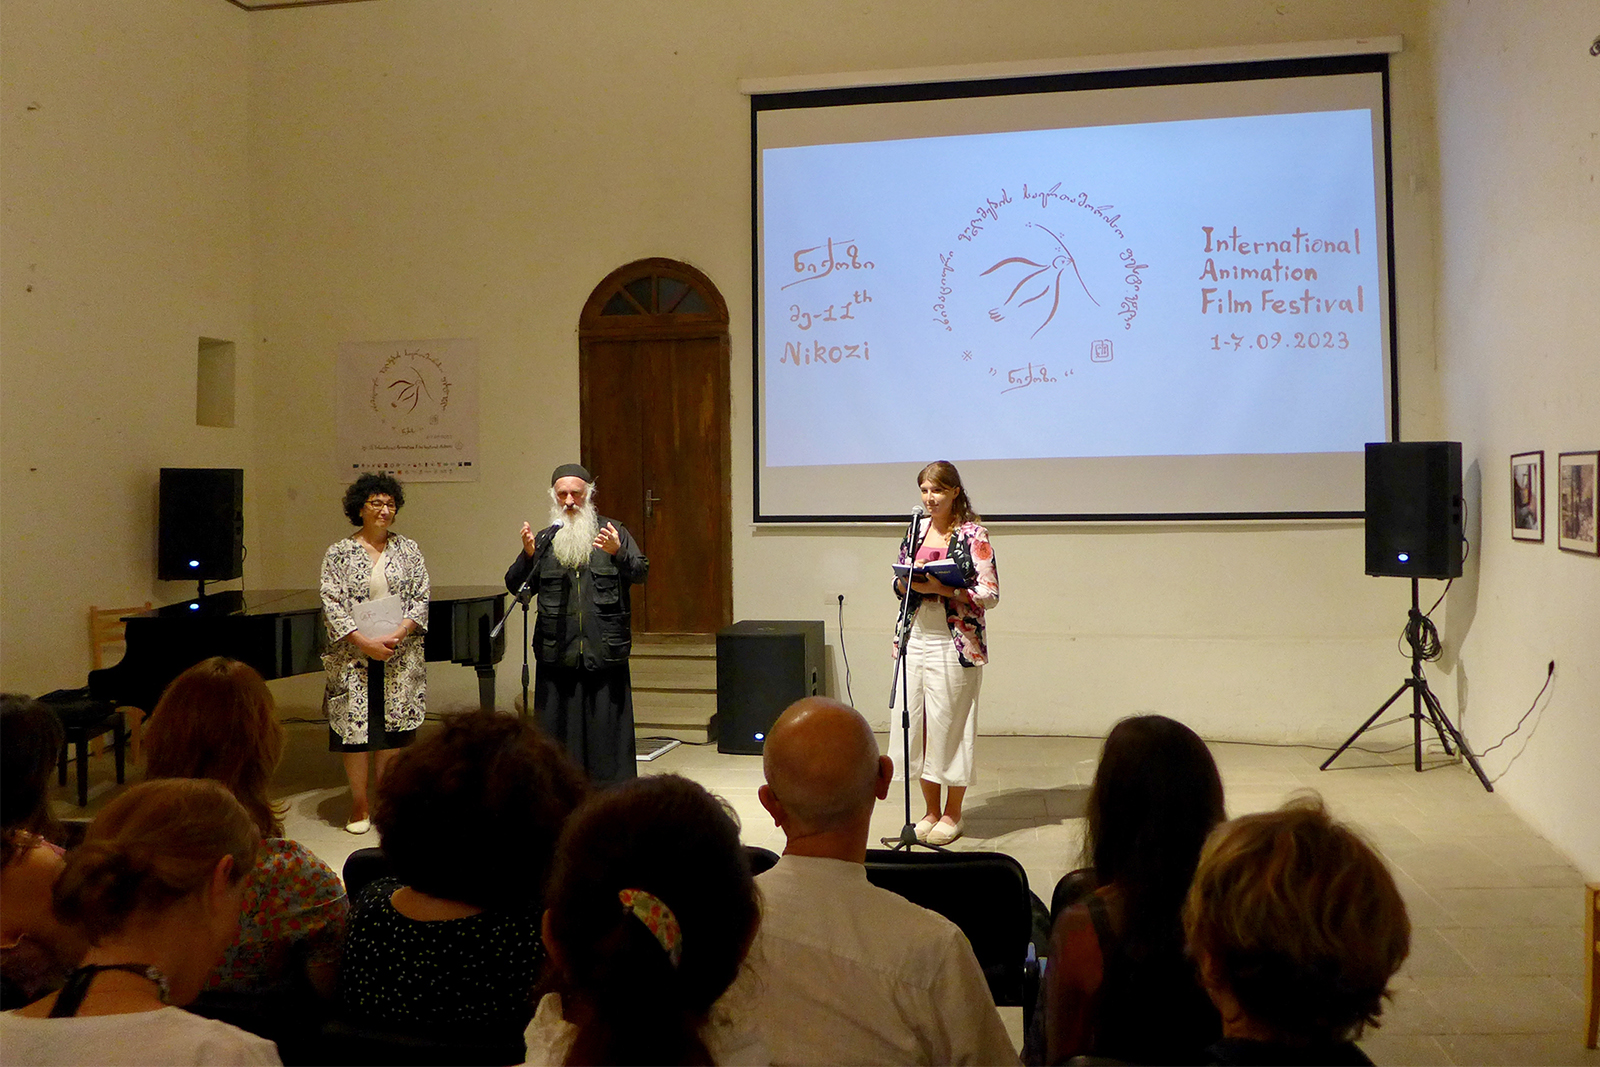 After the screening of his documentary movie, Bishop Isaiah introduces upcoming activities during the Nikozi International Animation Film Festival on Sept. 1, 2023, in Nikozi, Georgia. On the right, Eter Glurjidze translates his words from Georgian to English. Photo by Clément Girardot